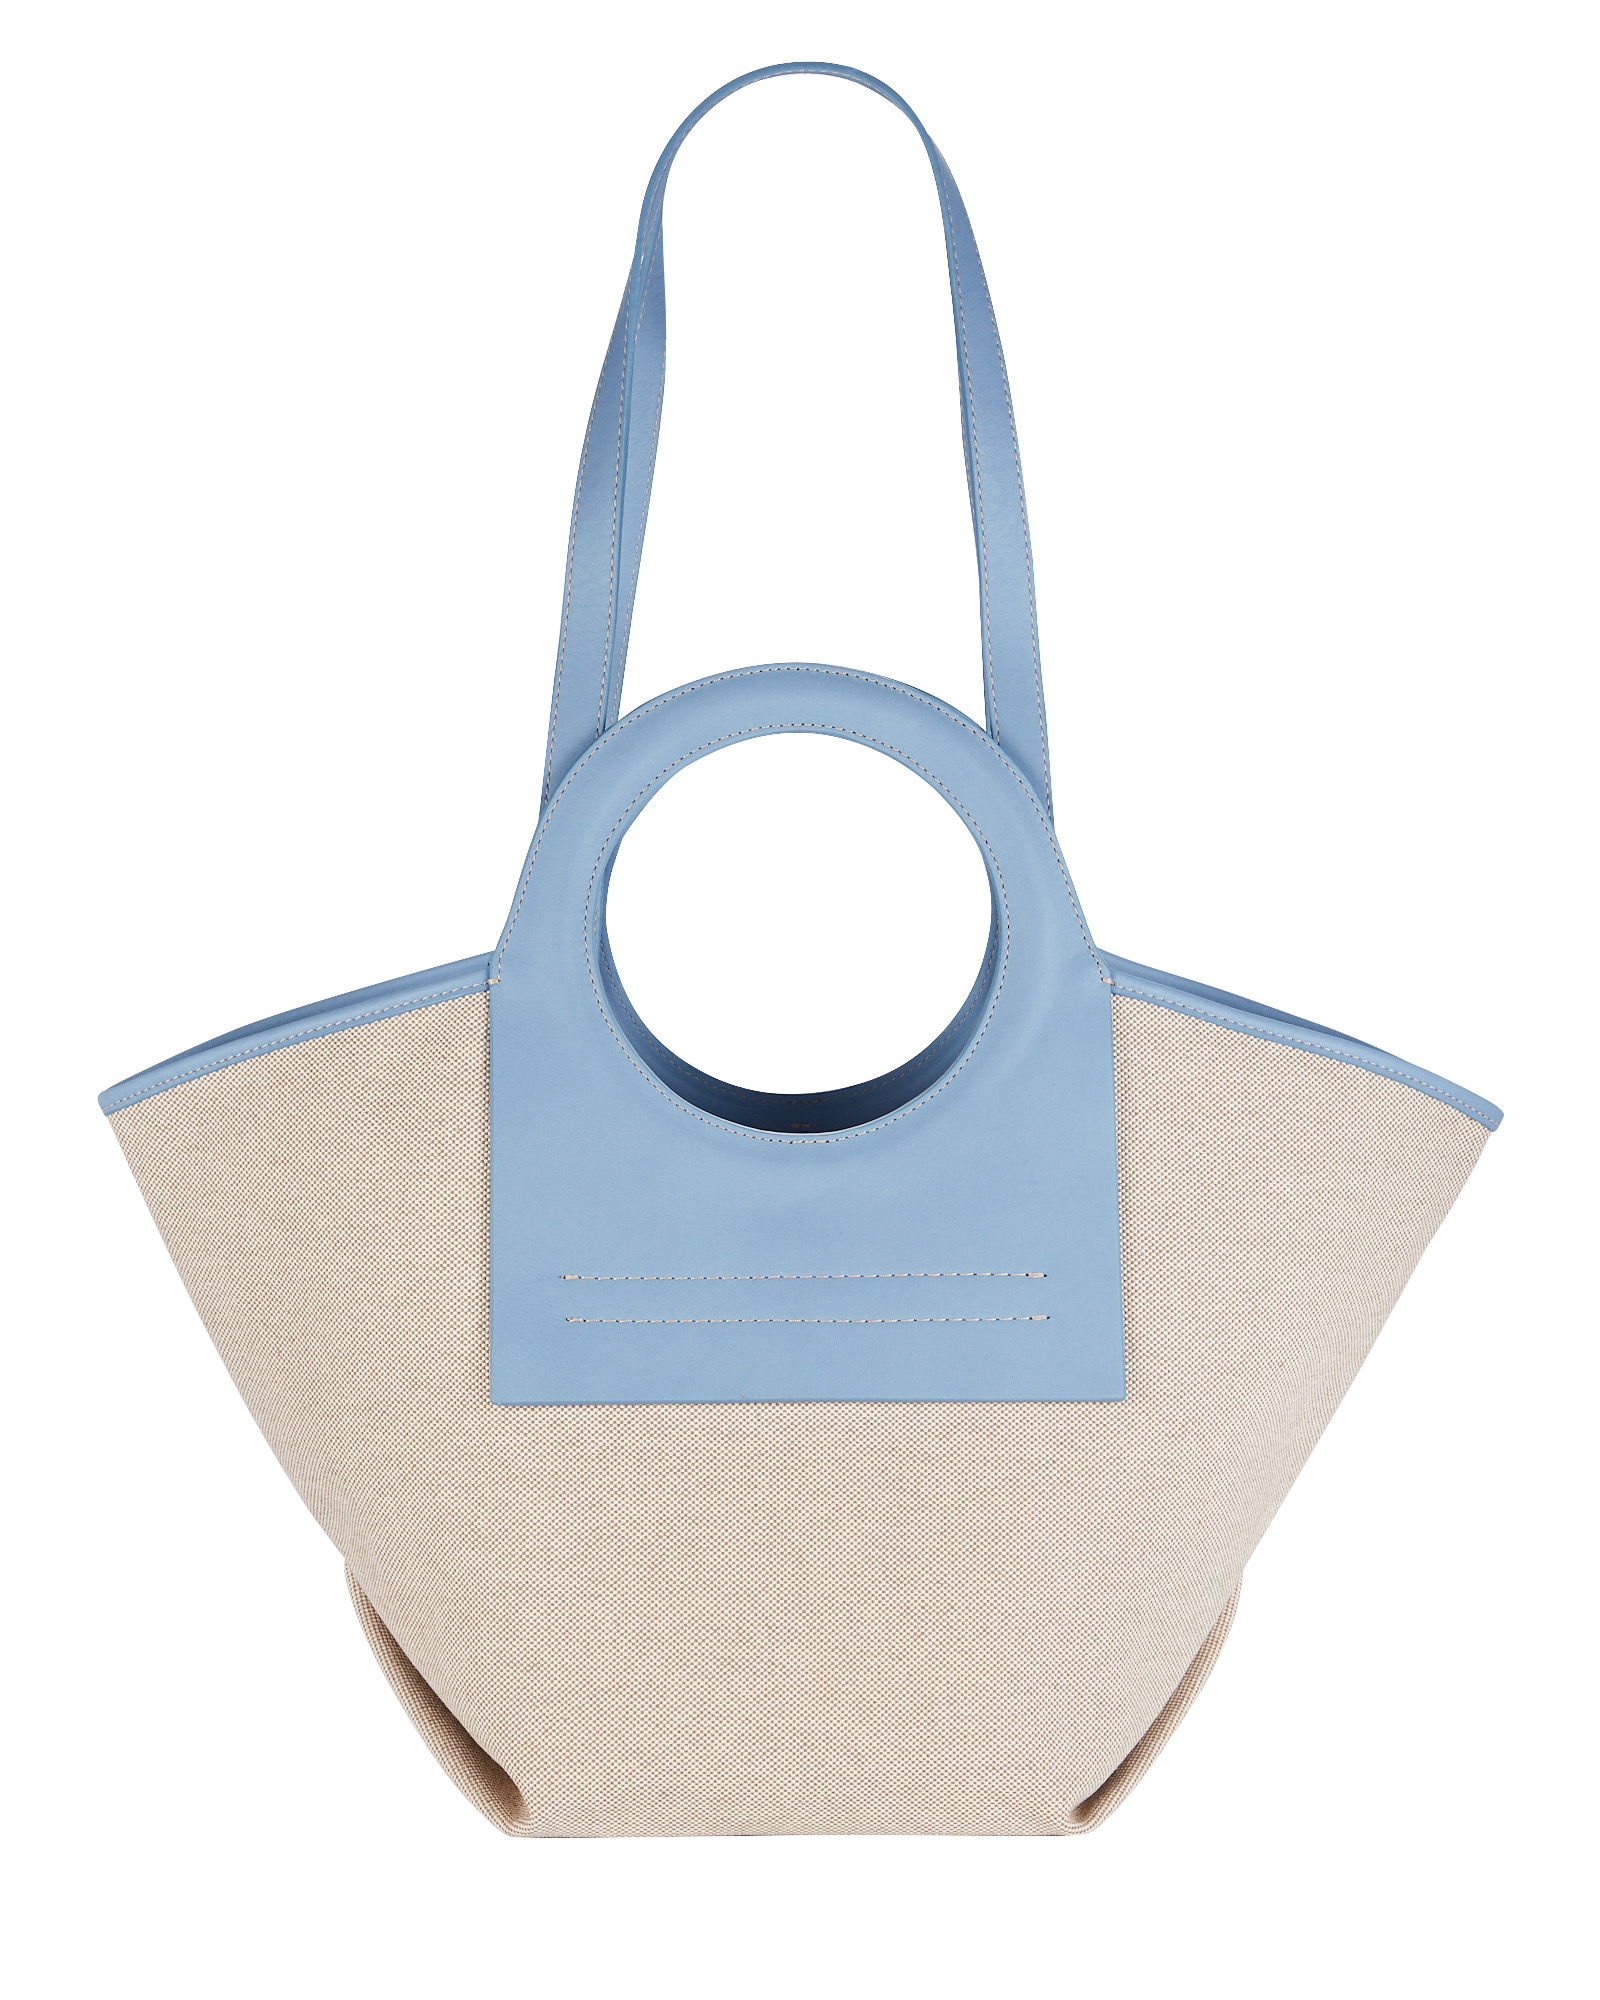 HEREU CALA SMALL LEATHER-TRIMMED CANVAS TOTE,060084753834